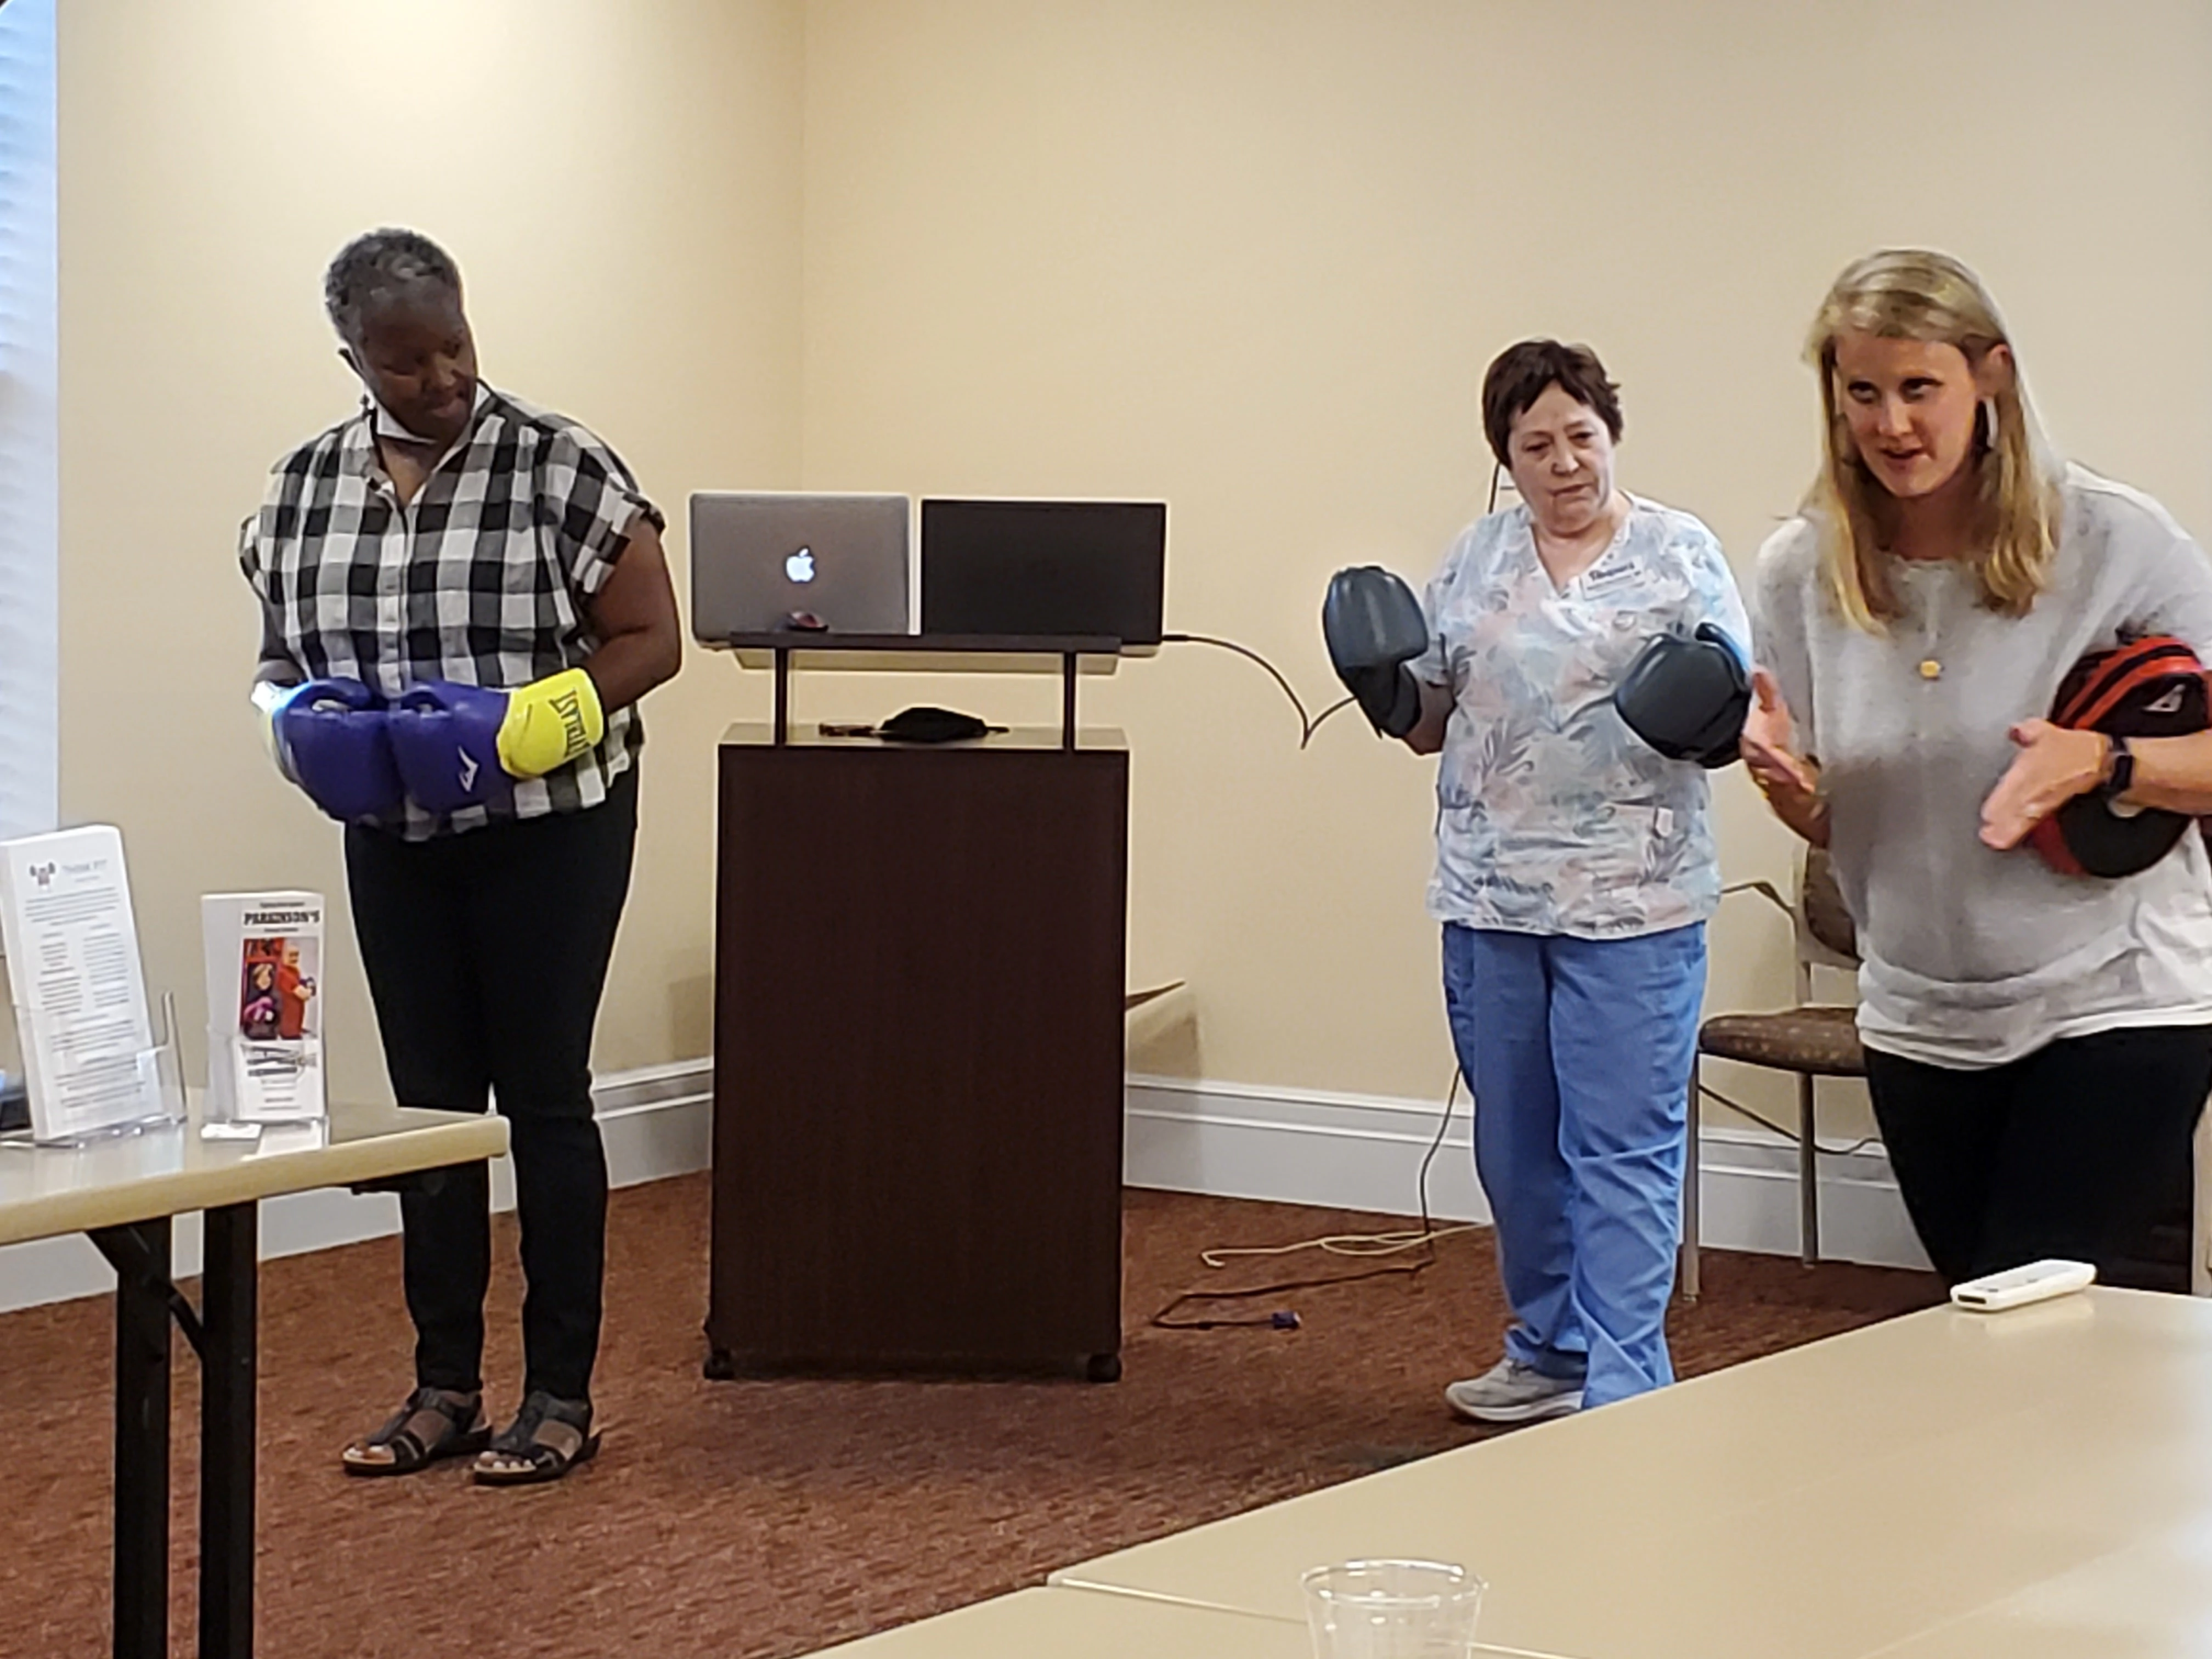 On September 14, 2022 Senior Helpers partnered with Rock Steady Boxing to give a presentation to the Case Management Society of VA in Midlothian, VA. Pictured is Lindsay Nexsen of Rocky Steady Boxing showing Kathie Matthews, CMSA/Senior Helpers and Kelva Waller of CMSA an example on how simple boxing maneuvers can assist with the challenges of neuromuscular diseases such as Parkinson’s.